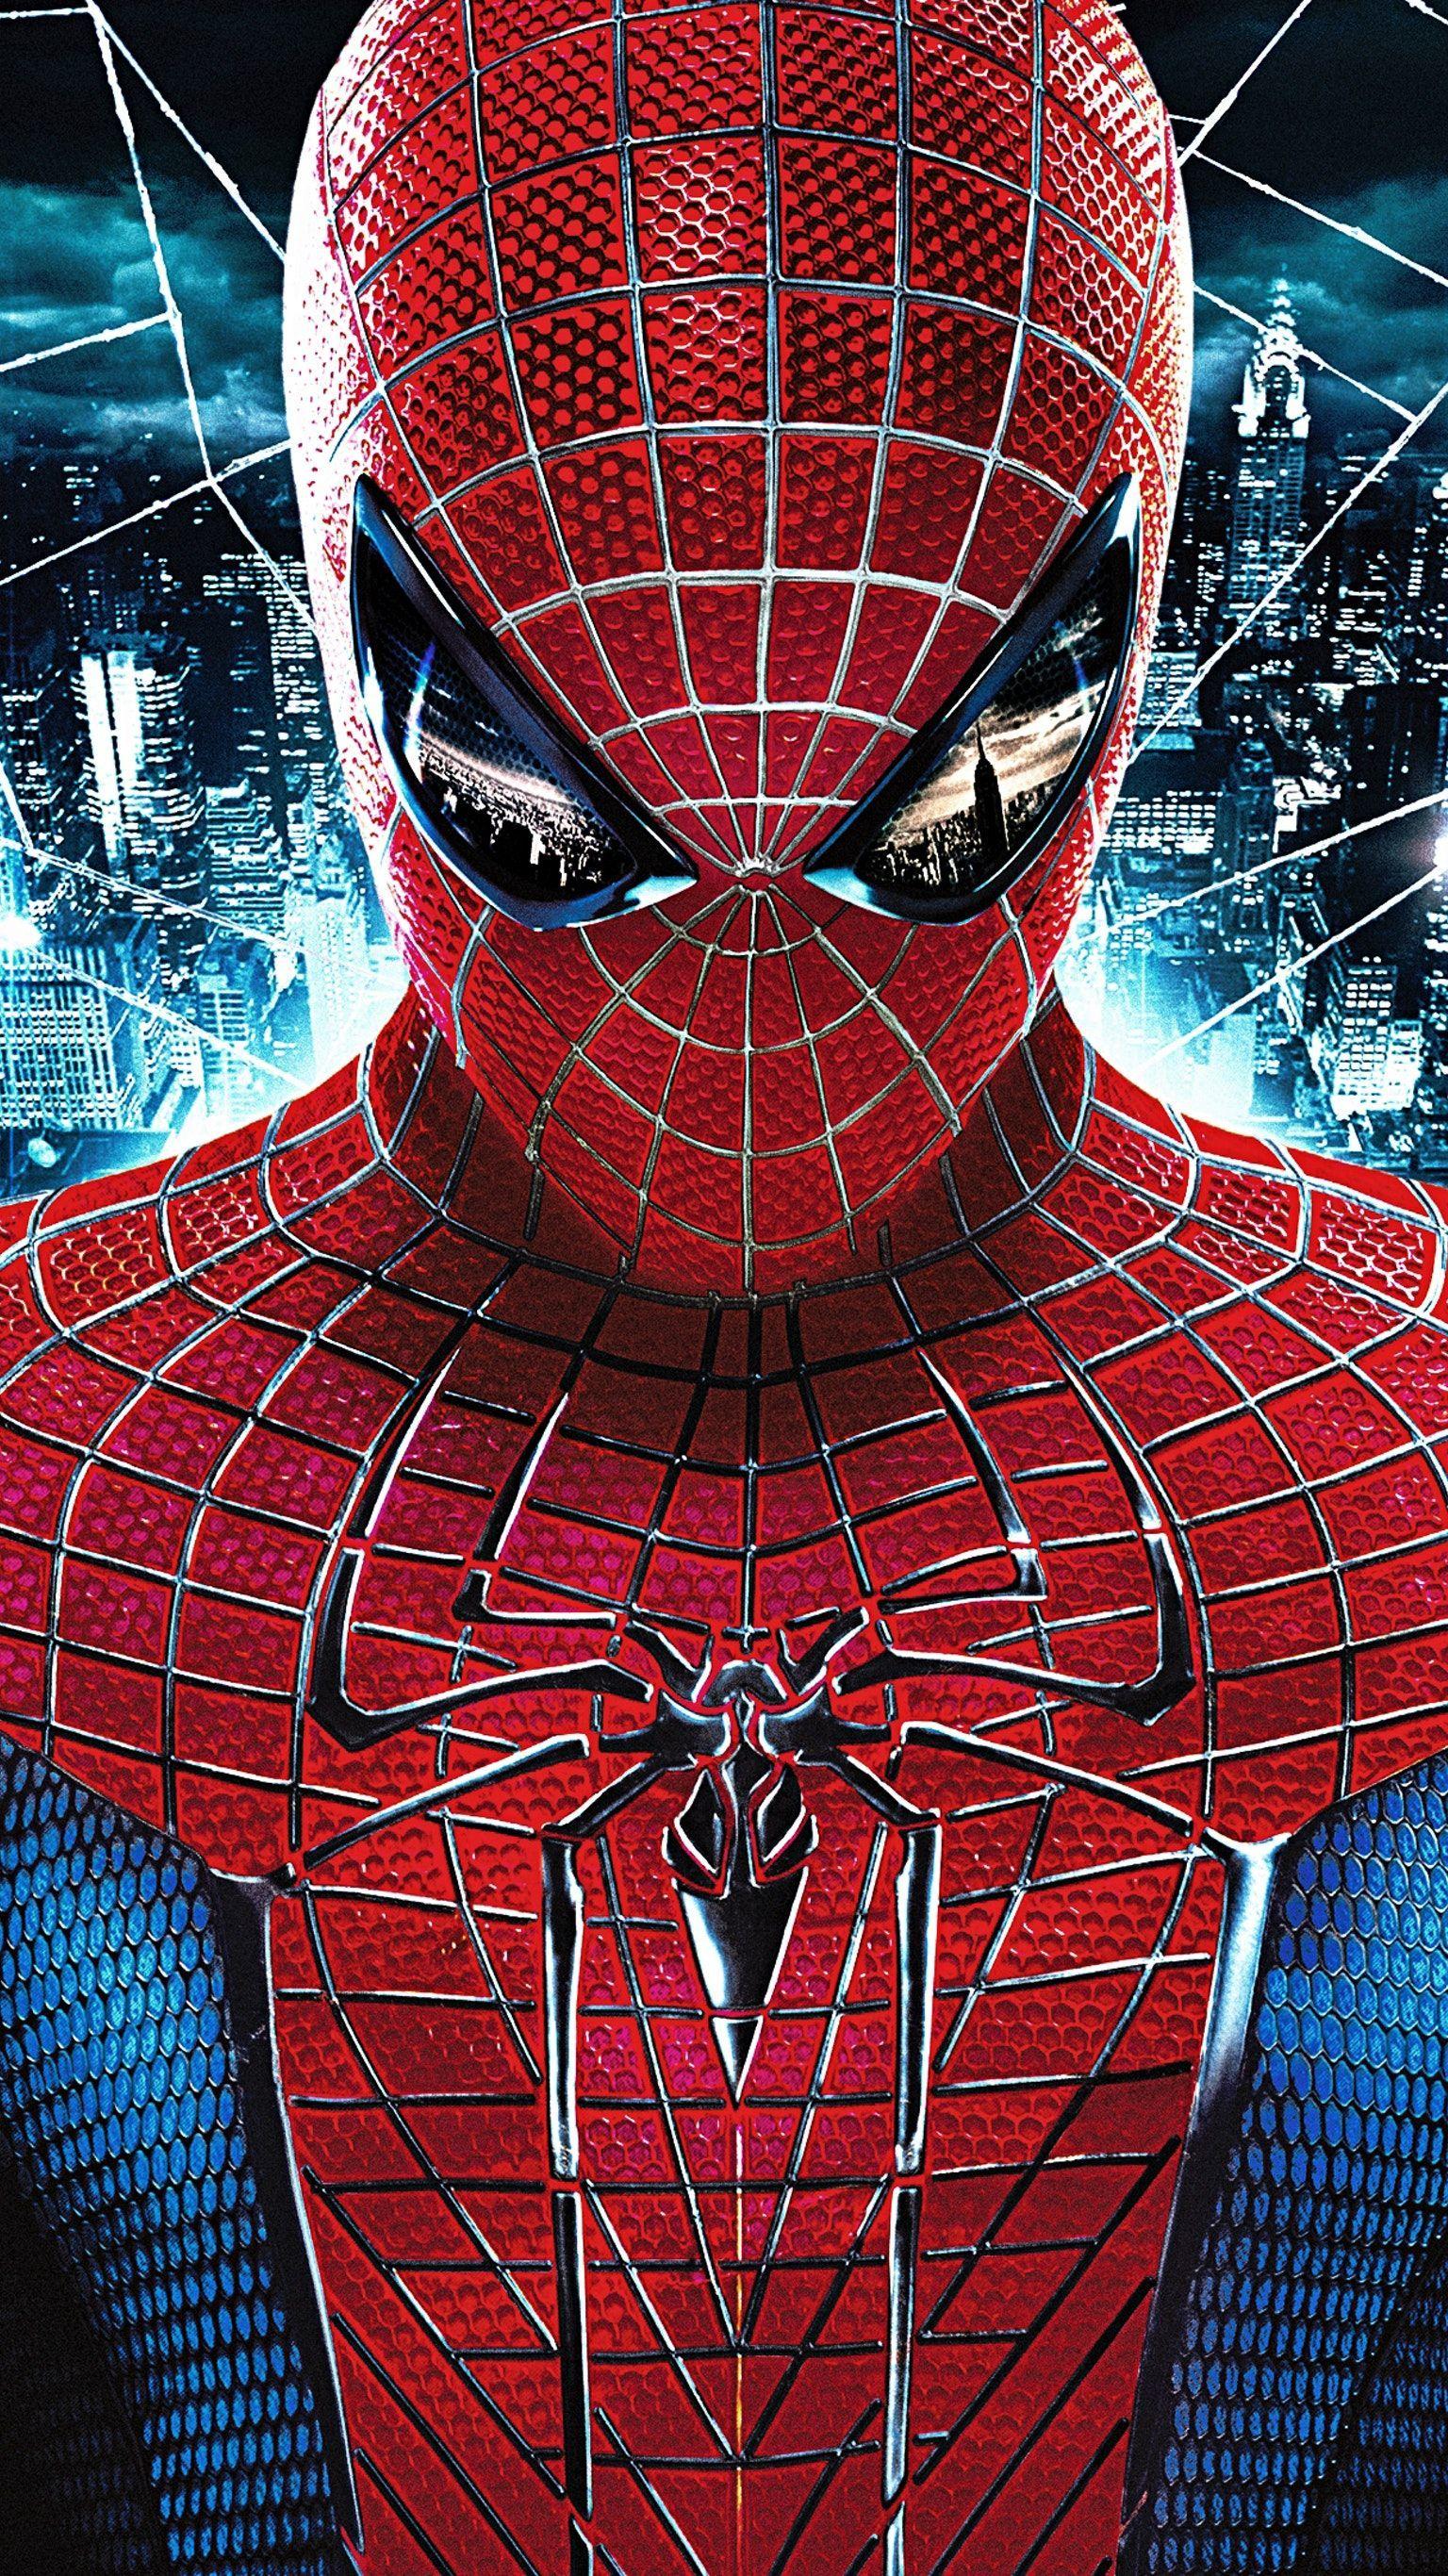 Spiderman Ultra Hd Wallpapers For Mobile